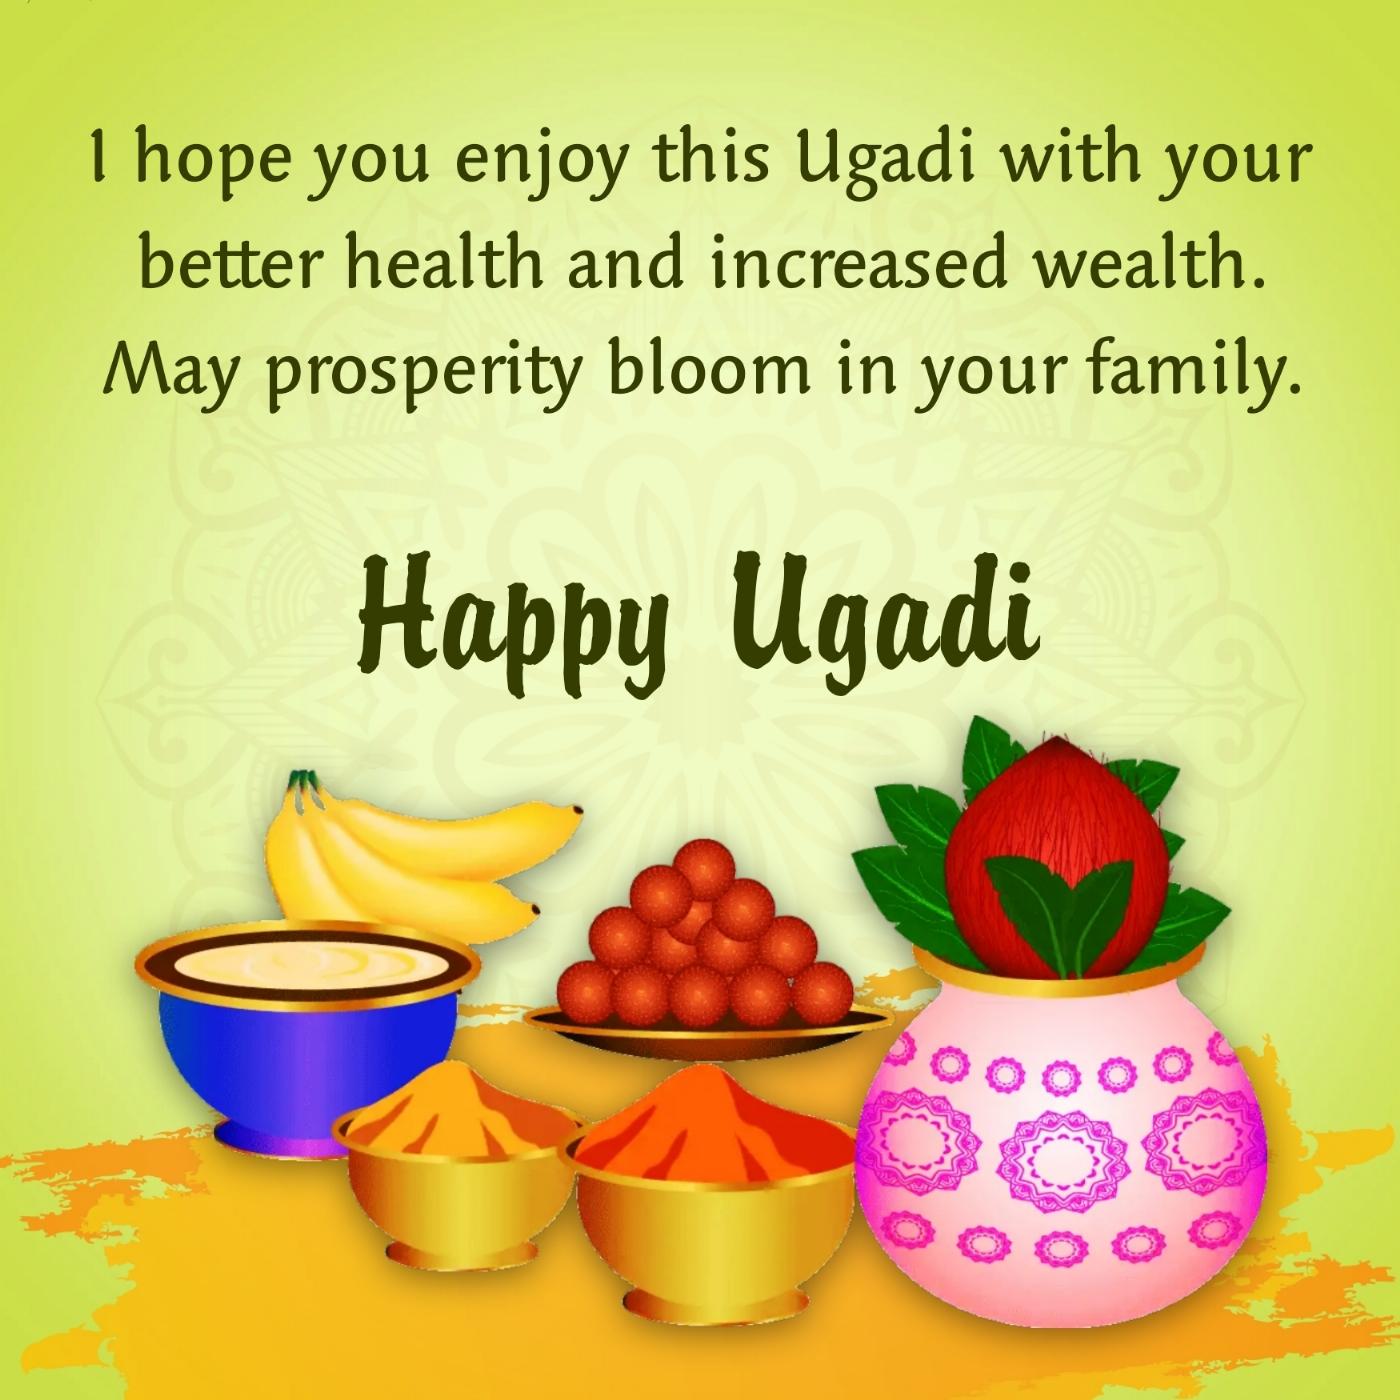 I hope you enjoy this Ugadi with your better health